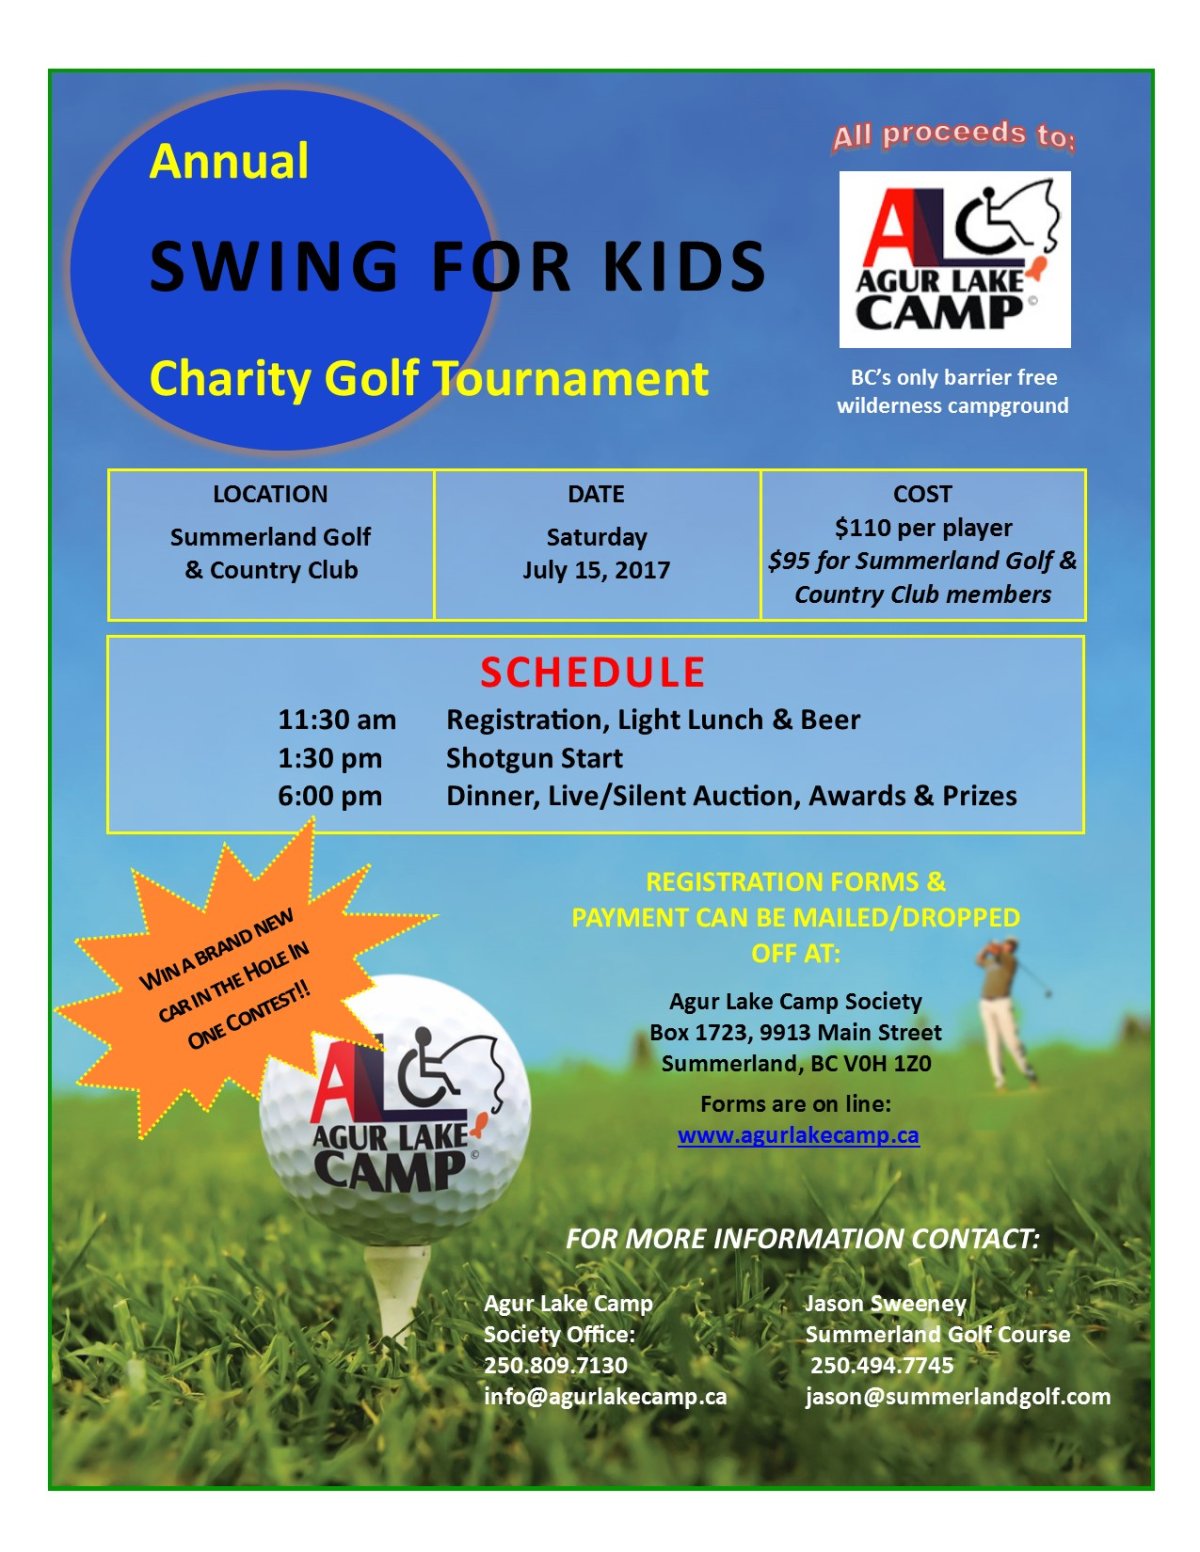 Swing for Kids Charity Golf Tournament - image